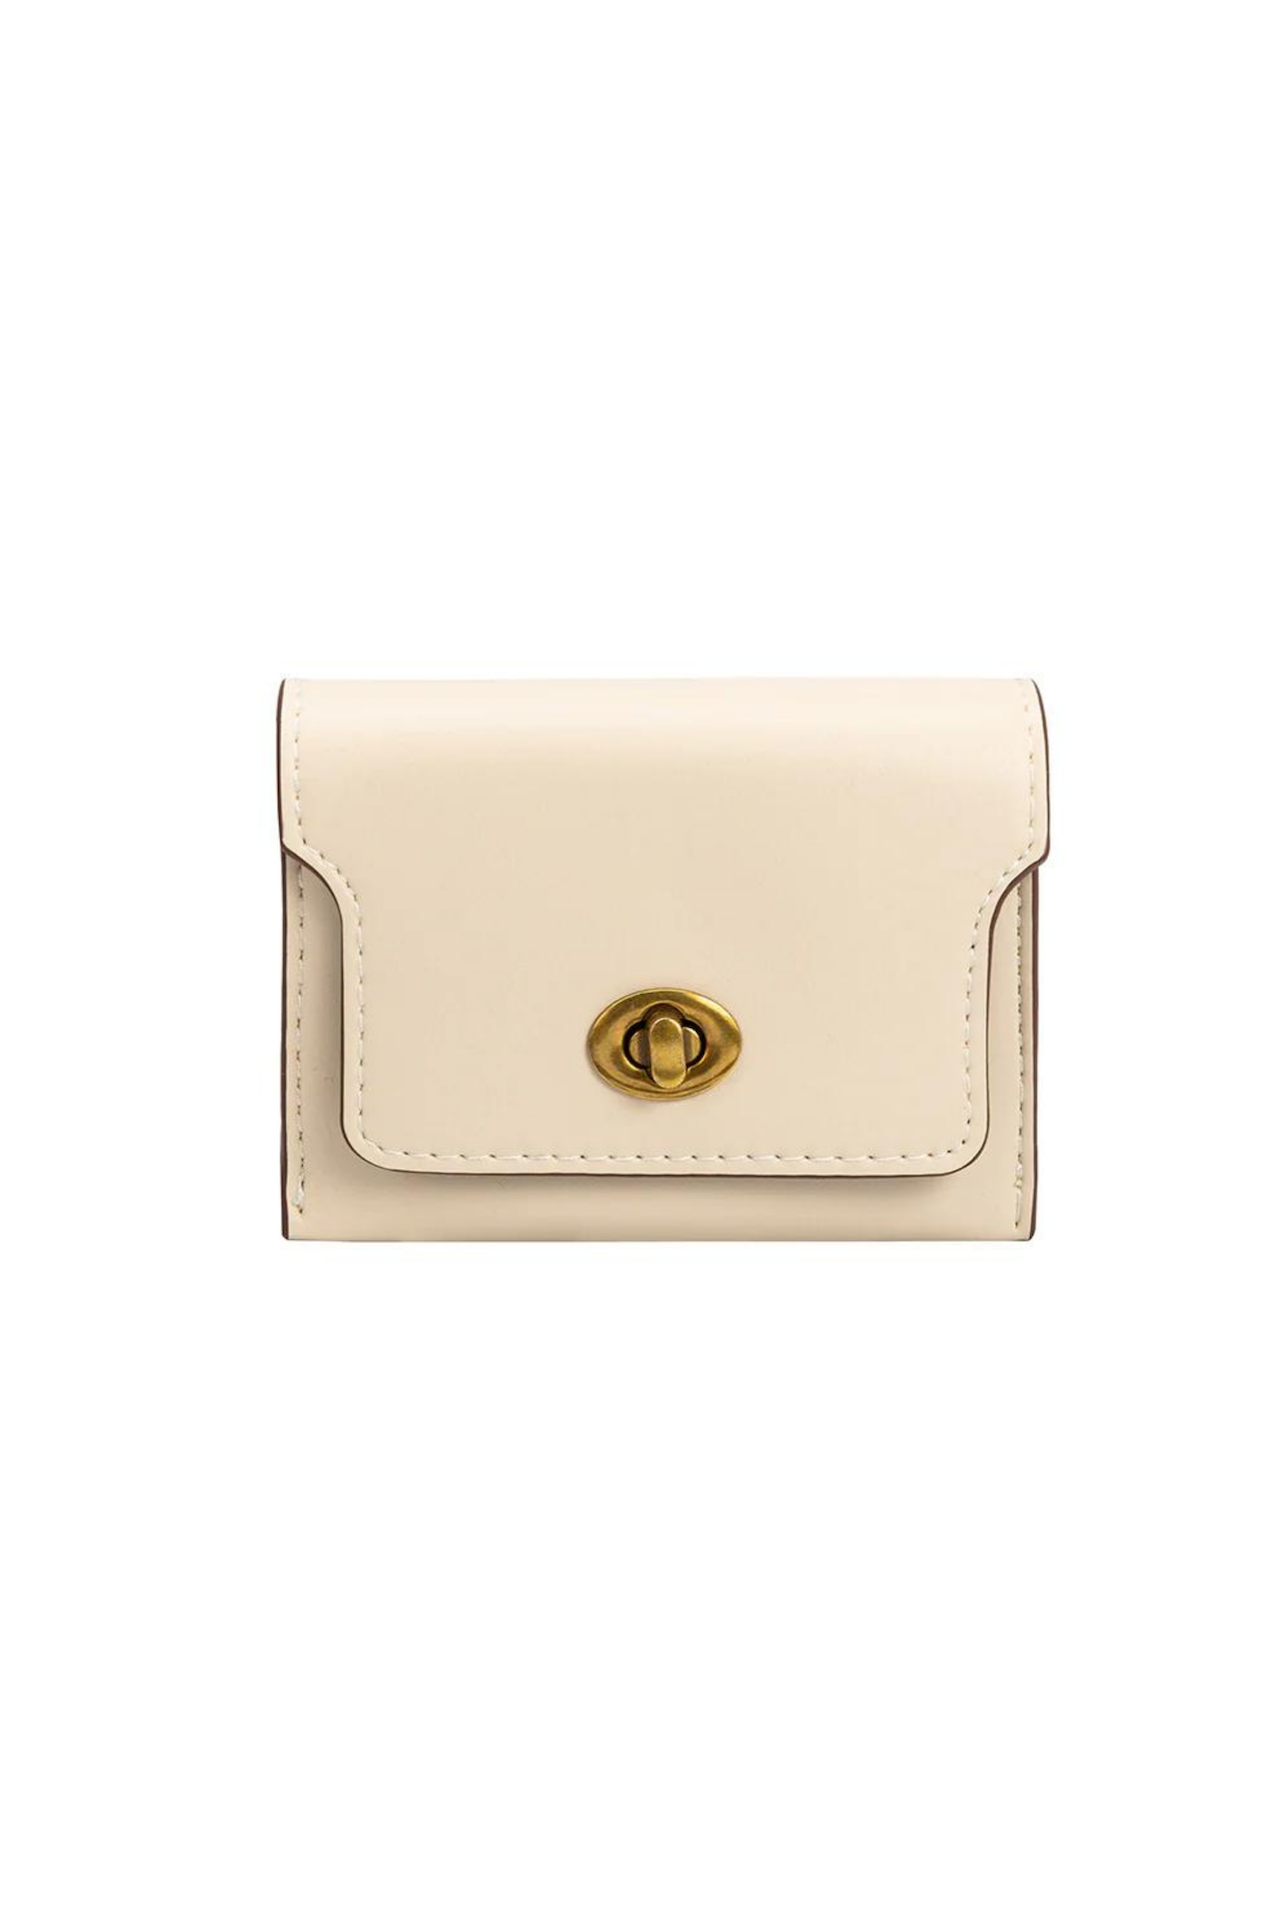 ivory white small wallet with gold hardware lock